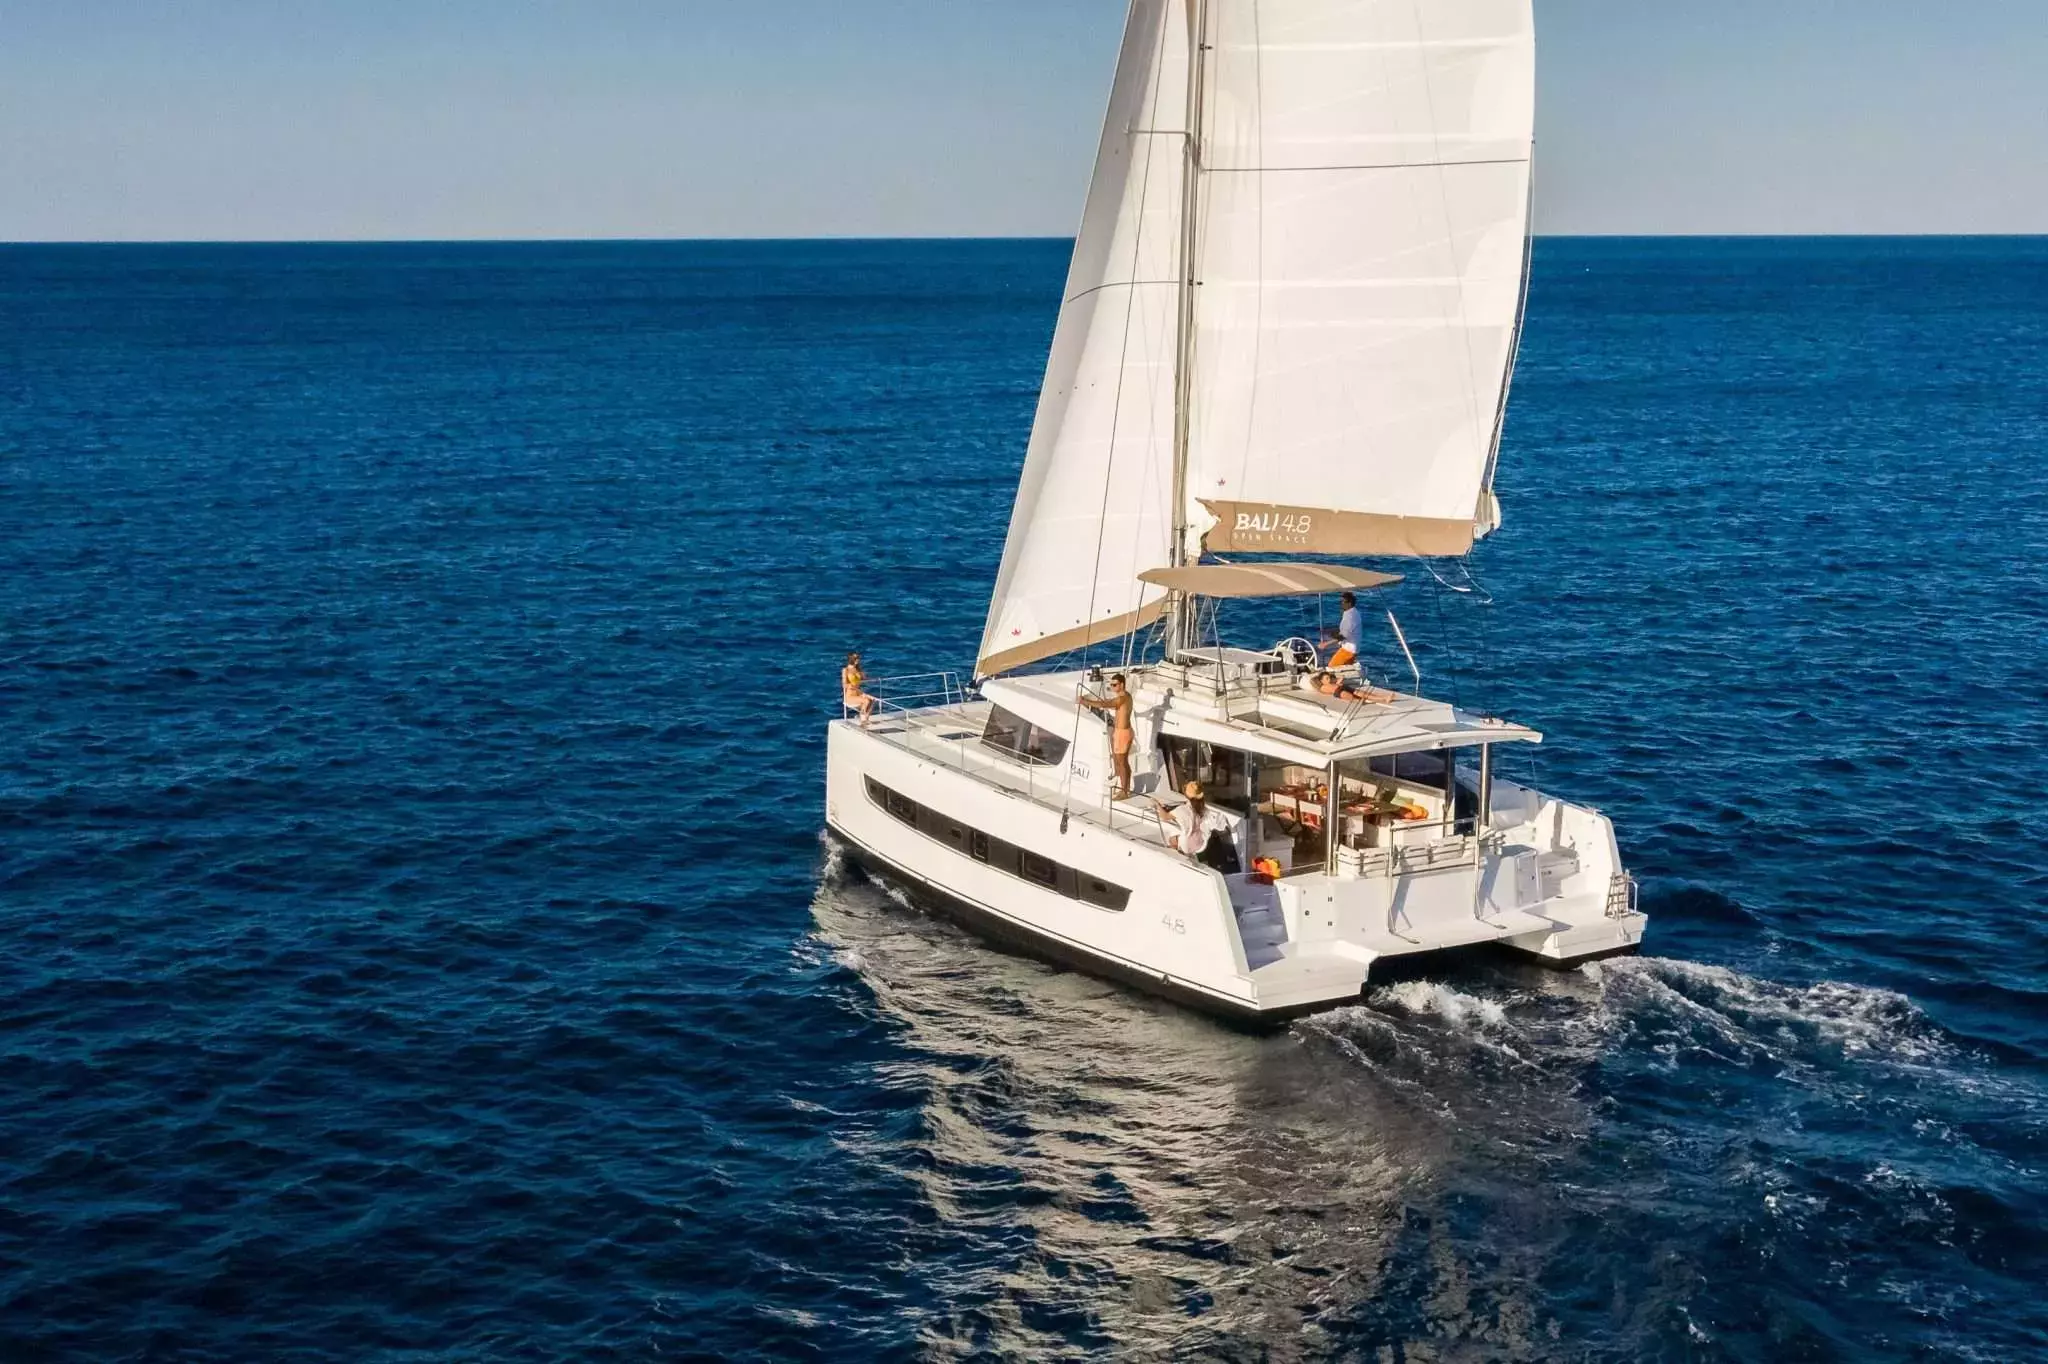 Kittiwake by Catana - Special Offer for a private Sailing Catamaran Rental in Harbour Island with a crew